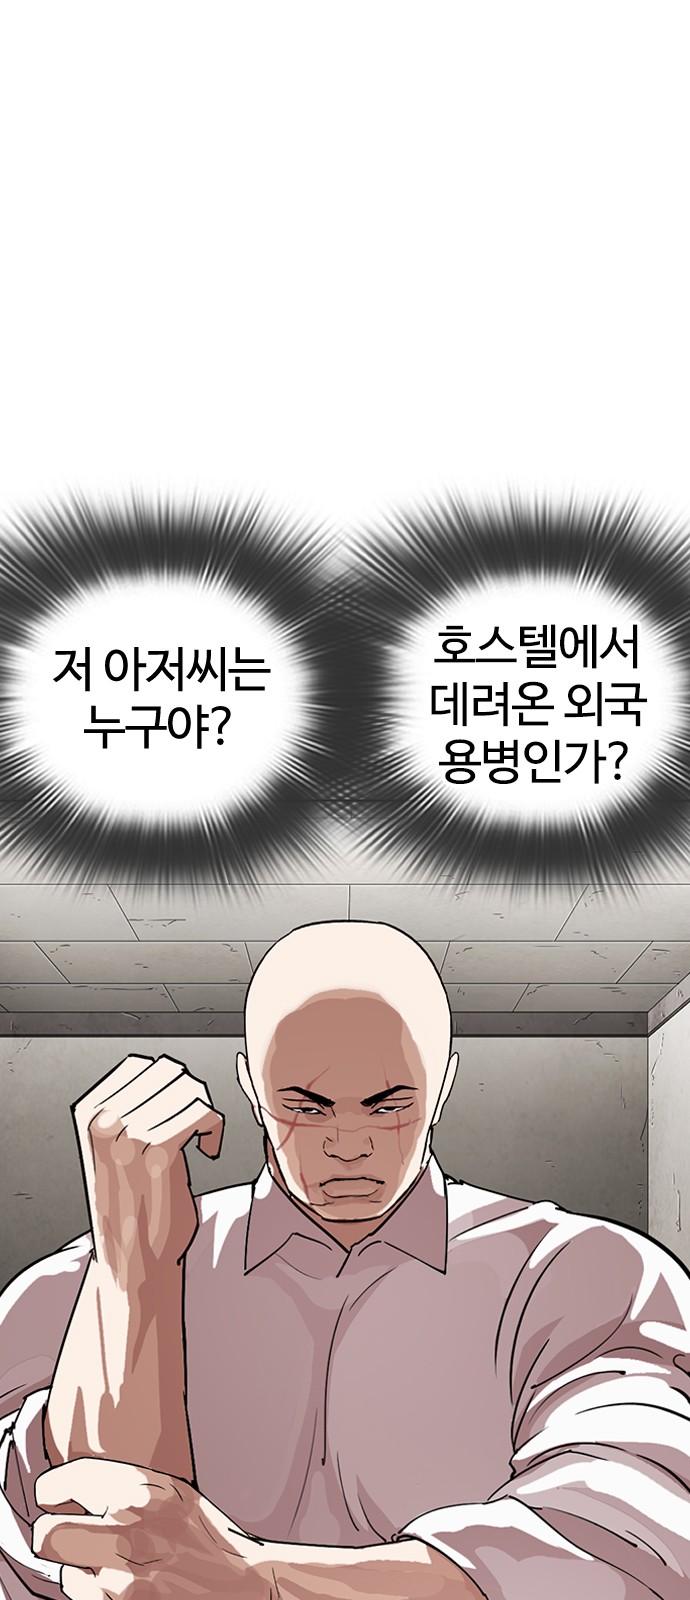 Lookism - Chapter 274 - Page 3